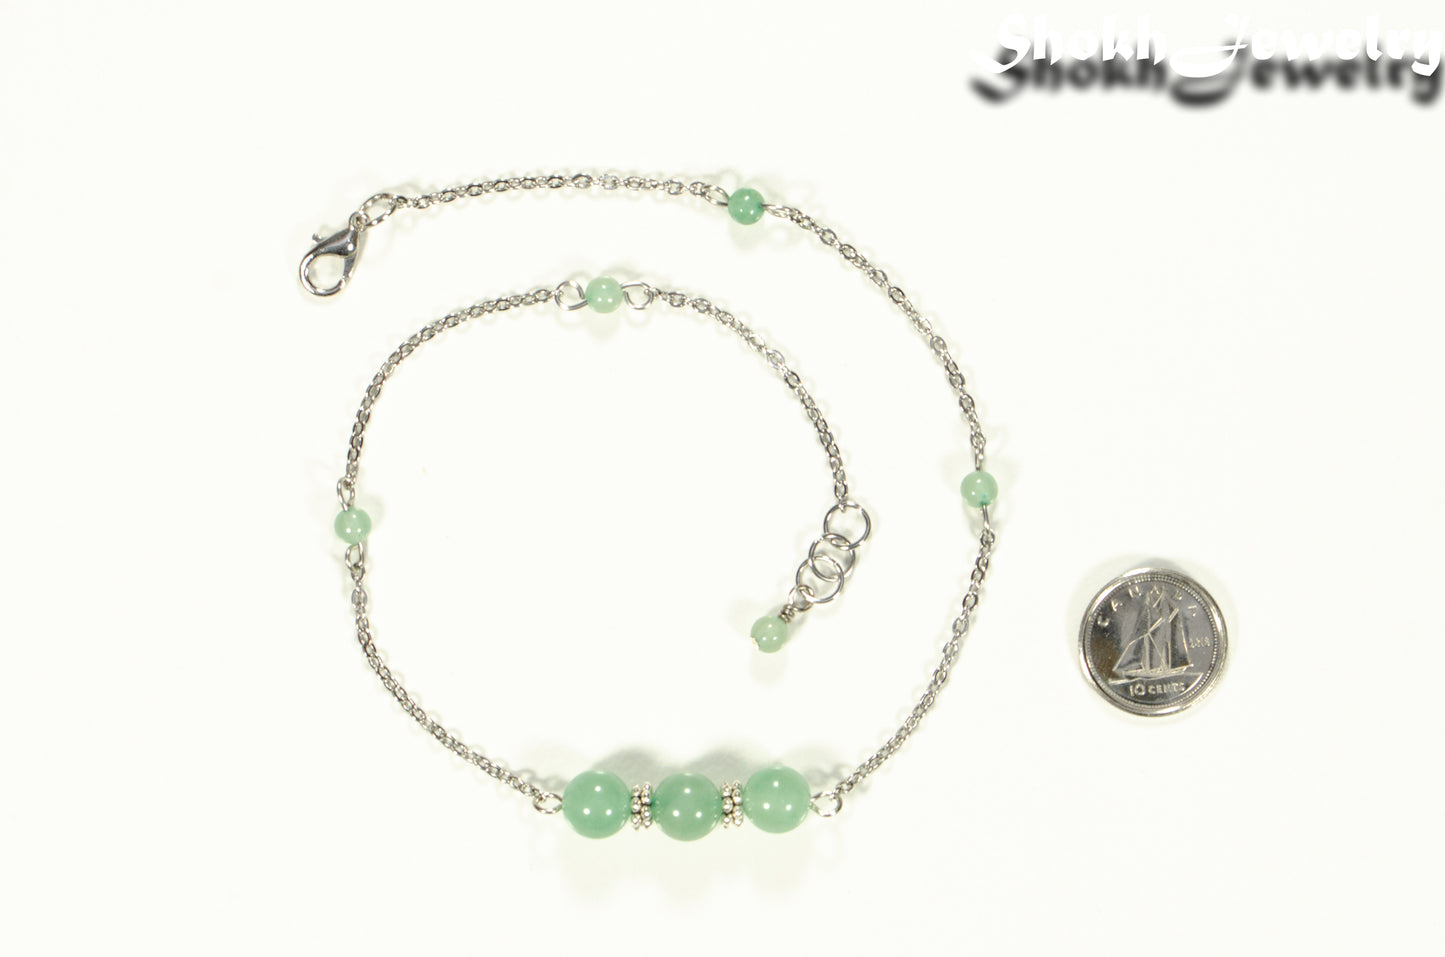 Natural Green Aventurine and Chain Choker Necklace beside a dime.